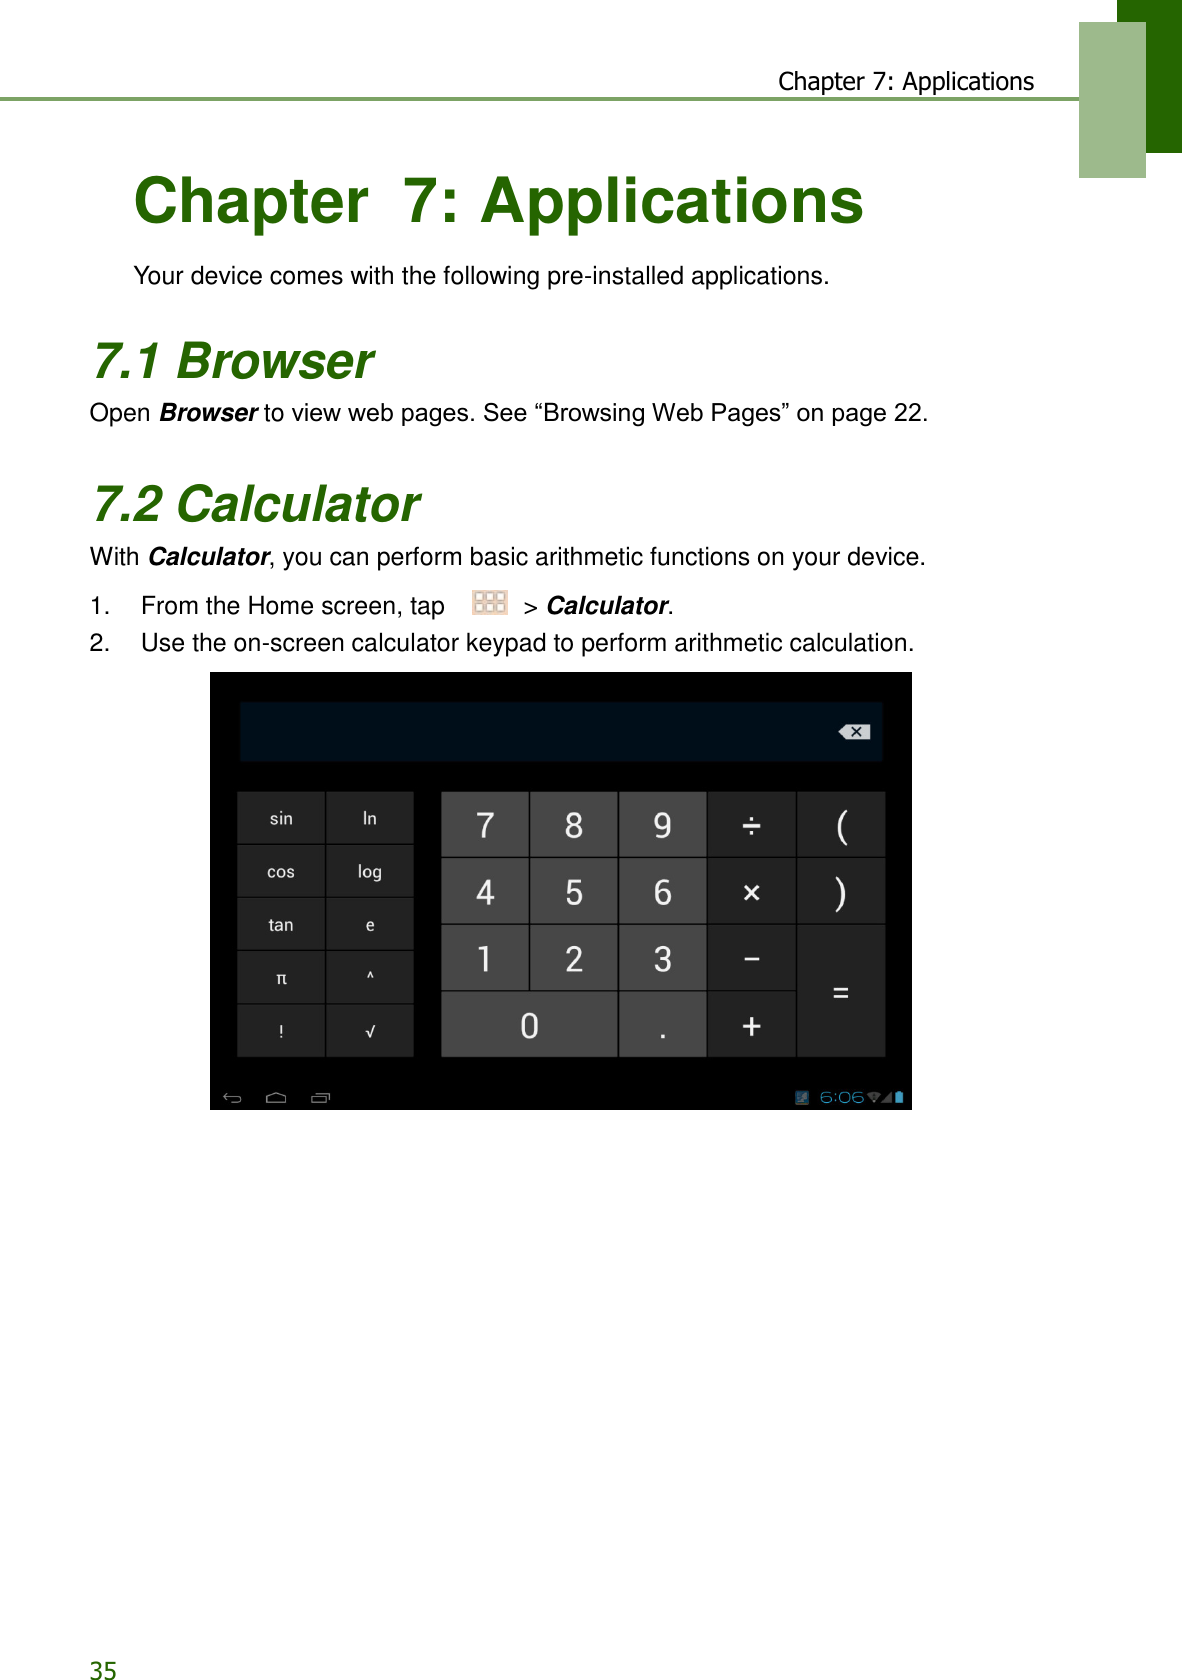 35 Chapter 7: Applications    Chapter  7: Applications  Your device comes with the following pre-installed applications.   7.1 Browser Open Browser to view web pages. See “Browsing Web Pages” on page 22.   7.2 Calculator With Calculator, you can perform basic arithmetic functions on your device.  1.    From the Home screen, tap     &gt; Calculator. 2.    Use the on-screen calculator keypad to perform arithmetic calculation.   